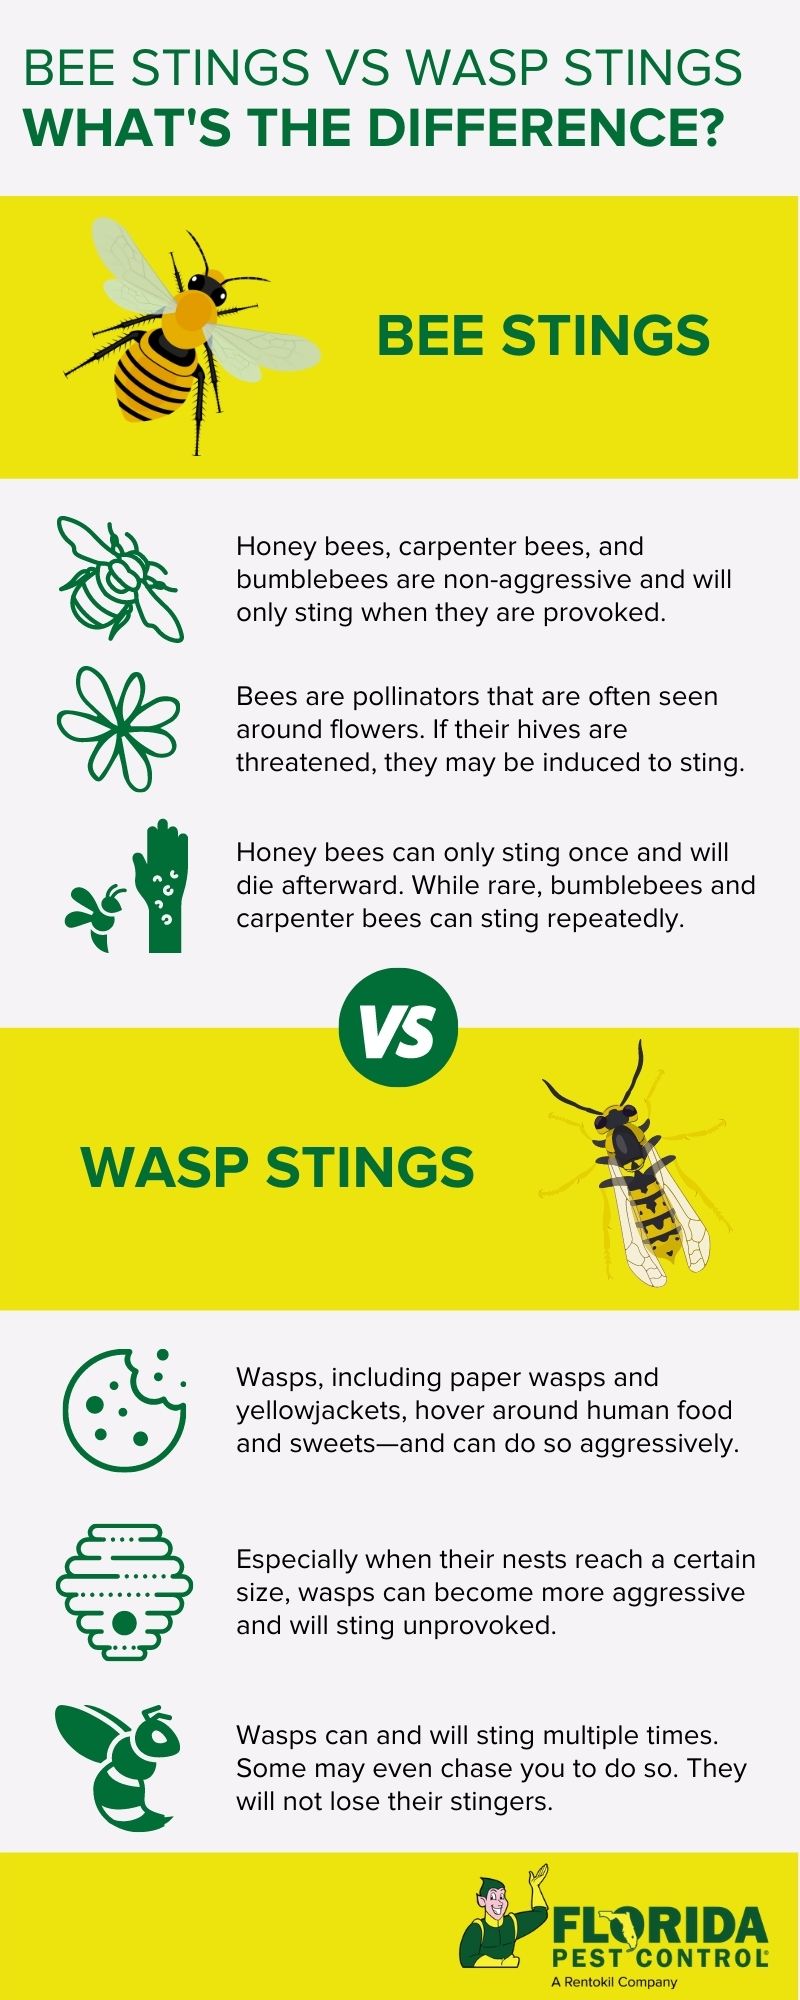 Differences between wasp and bee stings in Florida - Florida Pest Control